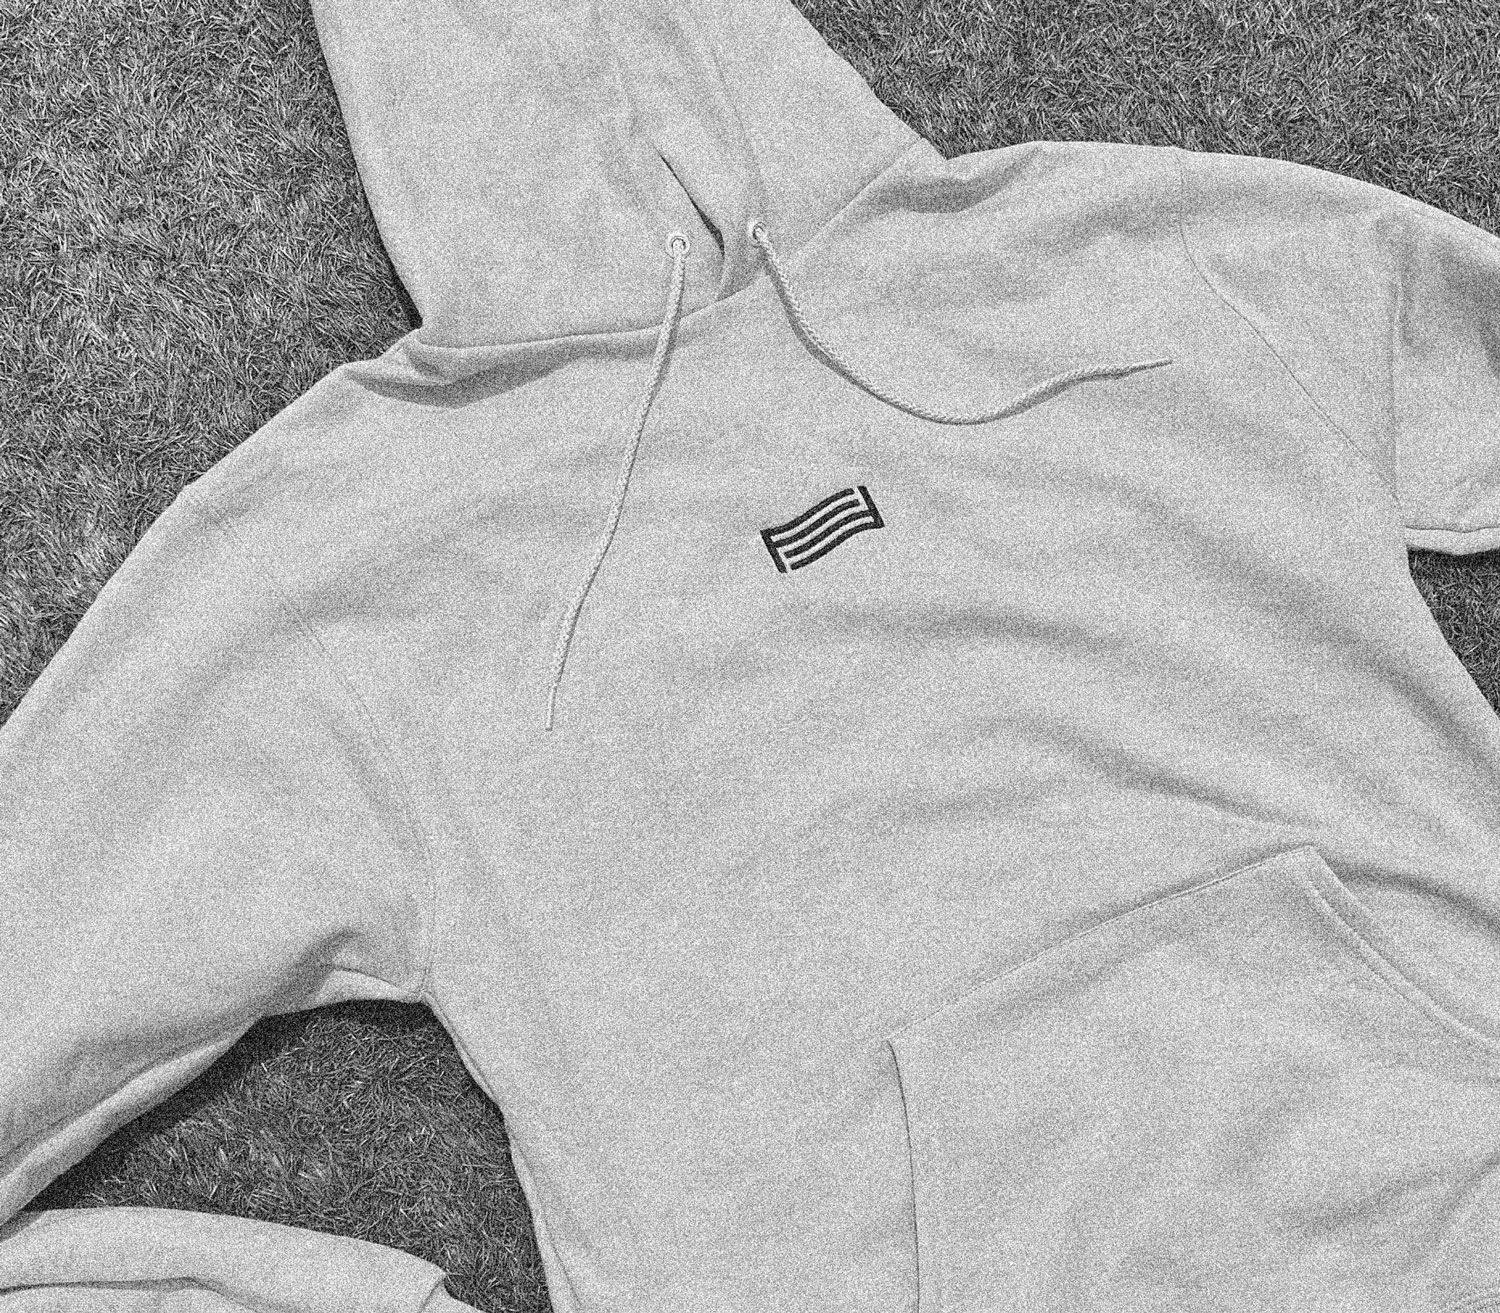 Image of a ForFreedoms hoodie